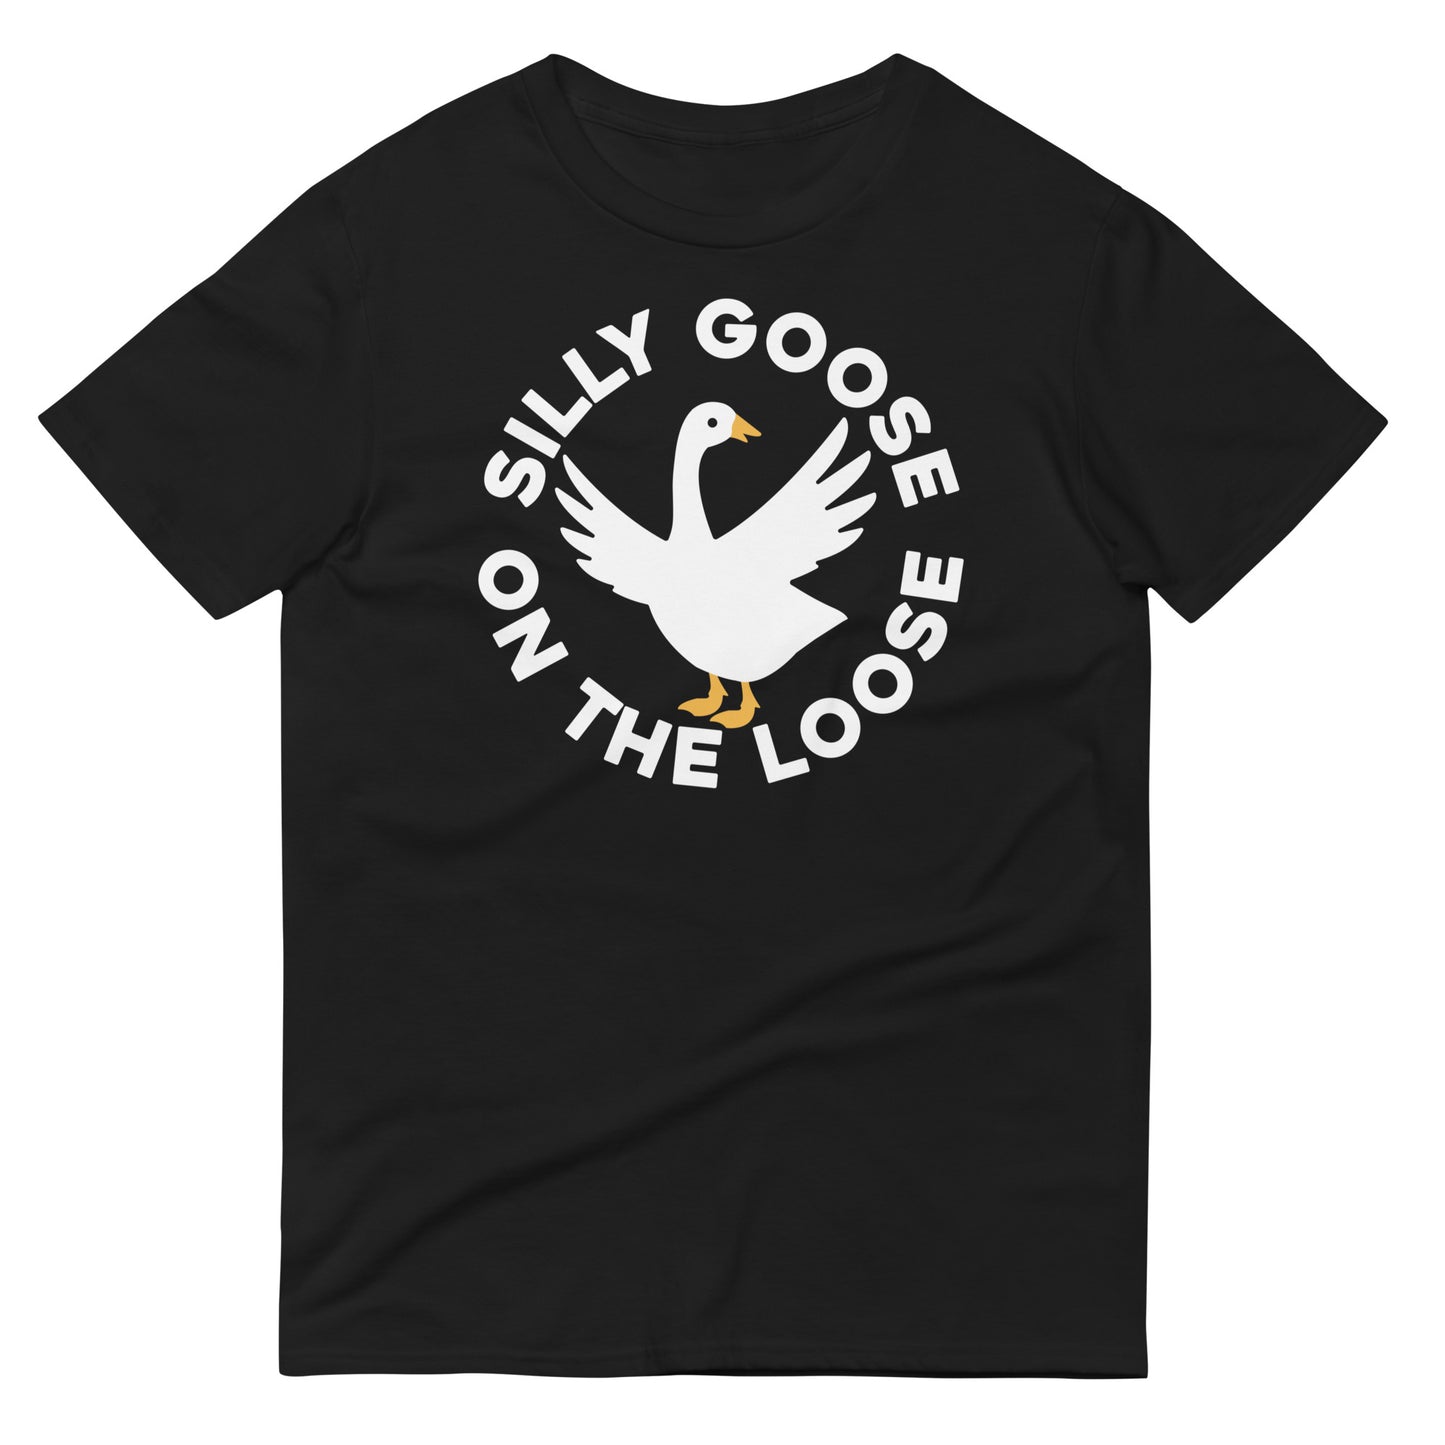 Silly Goose On The Loose Men's Signature Tee